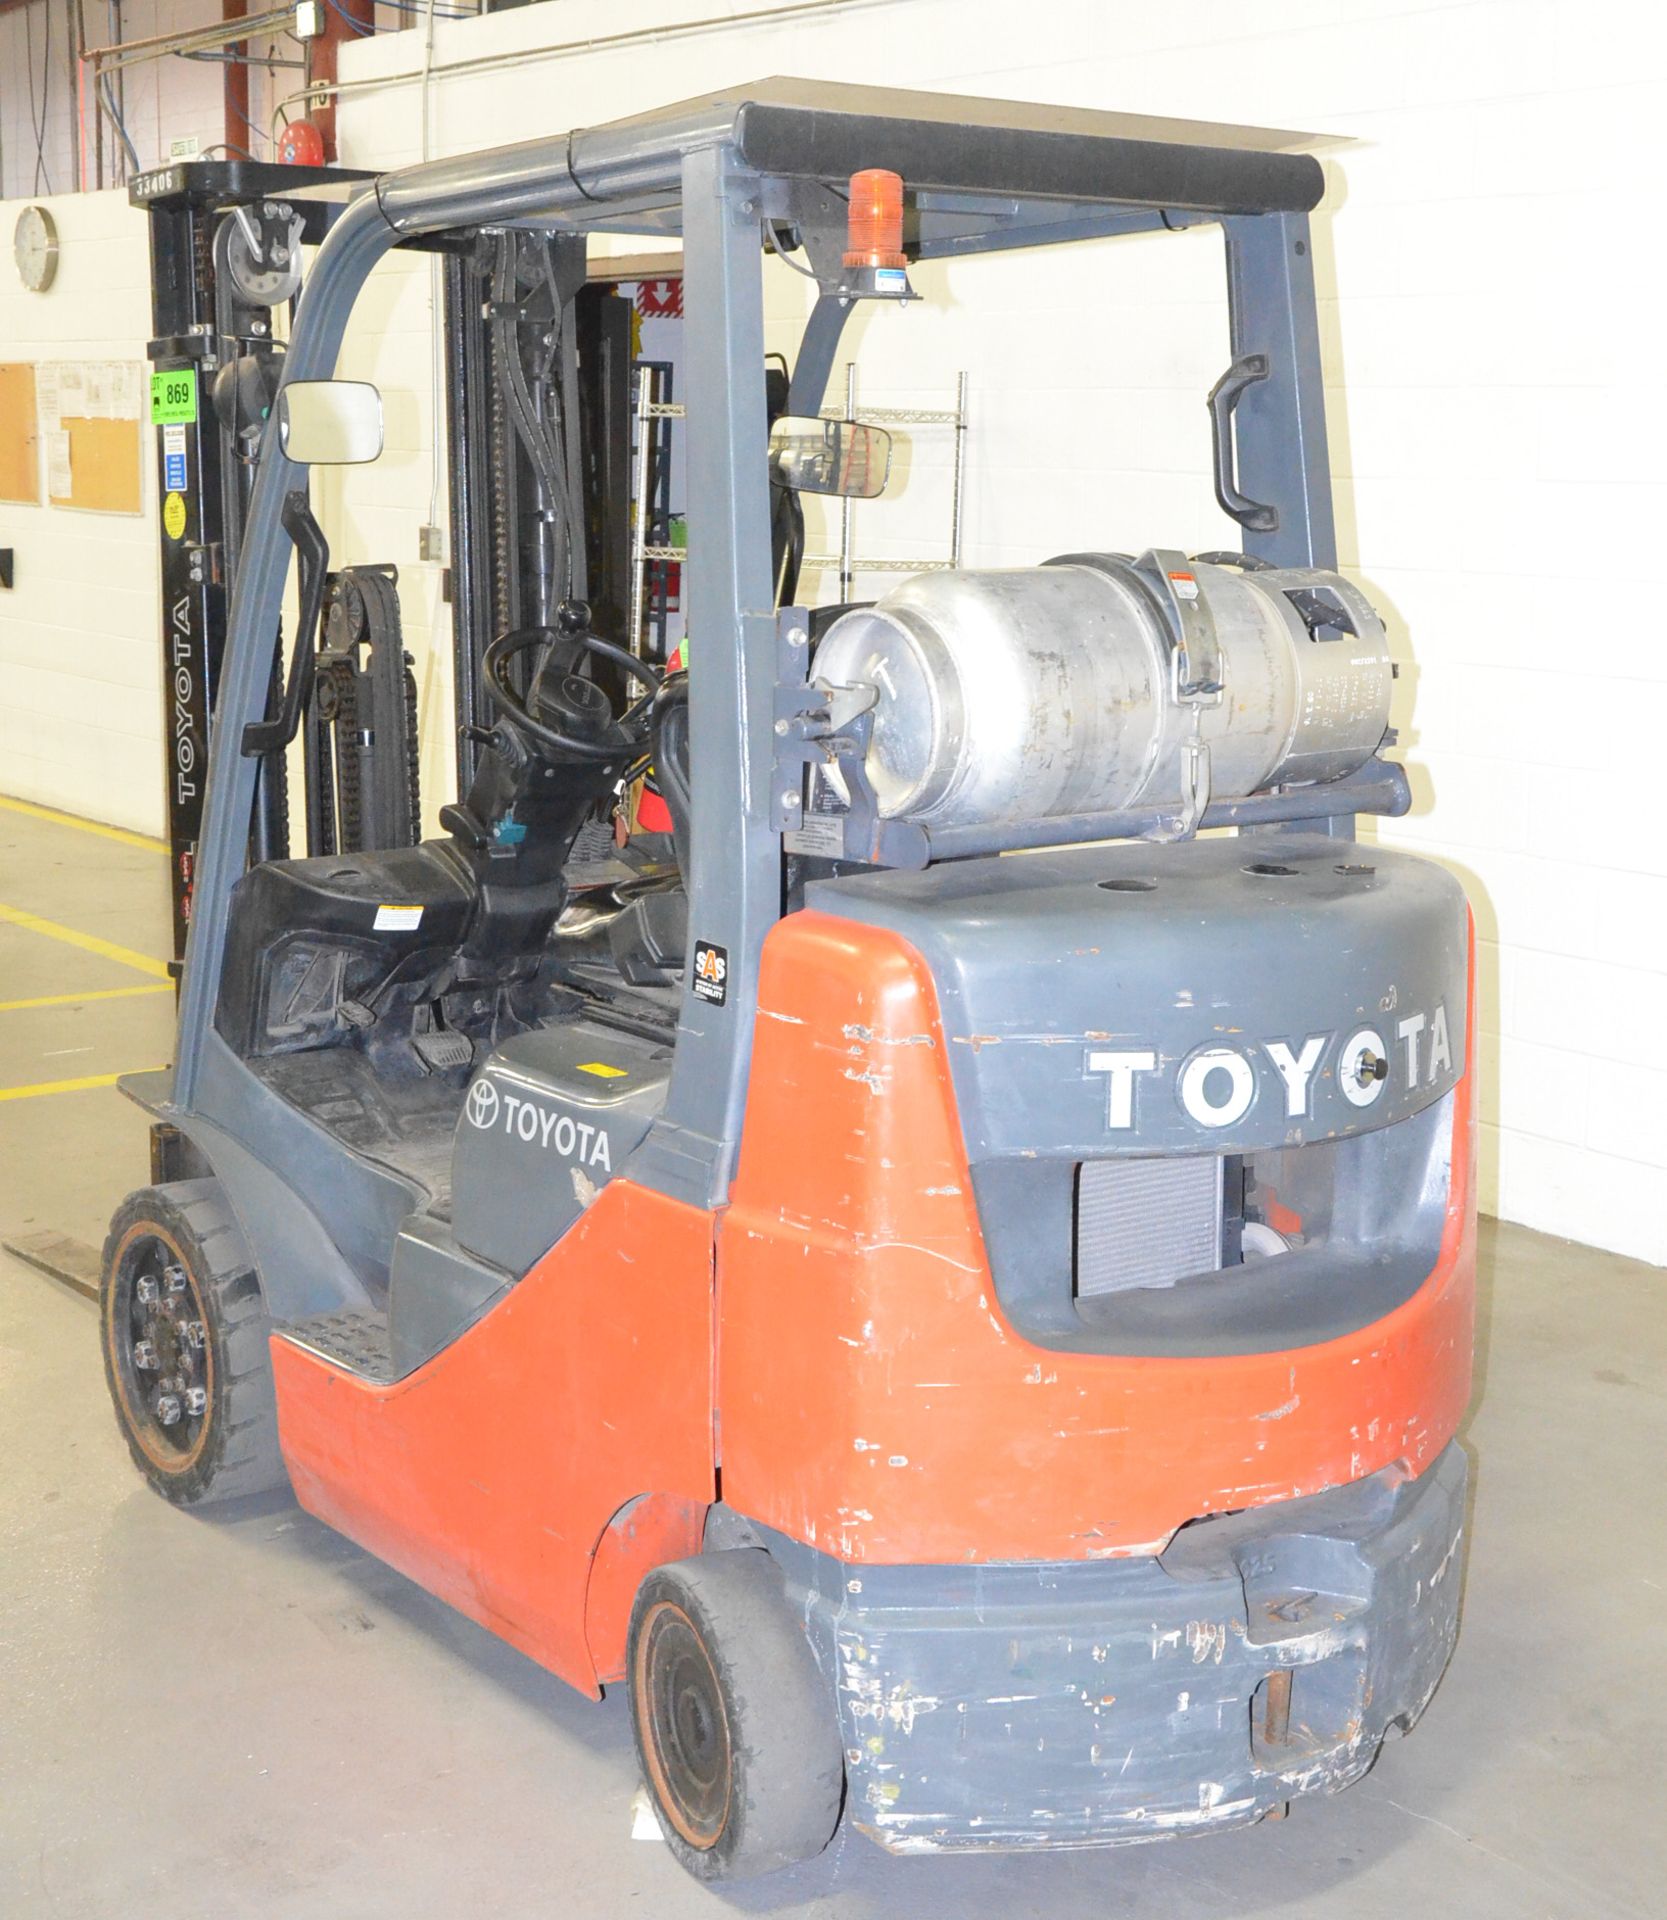 TOYOTA (2013) 8FGCU25 LPG FORKLIFT WITH 4800 LB. CAPACITY, 189" VERTICAL LIFT, 3 STAGE MAST, SOLID - Image 4 of 6